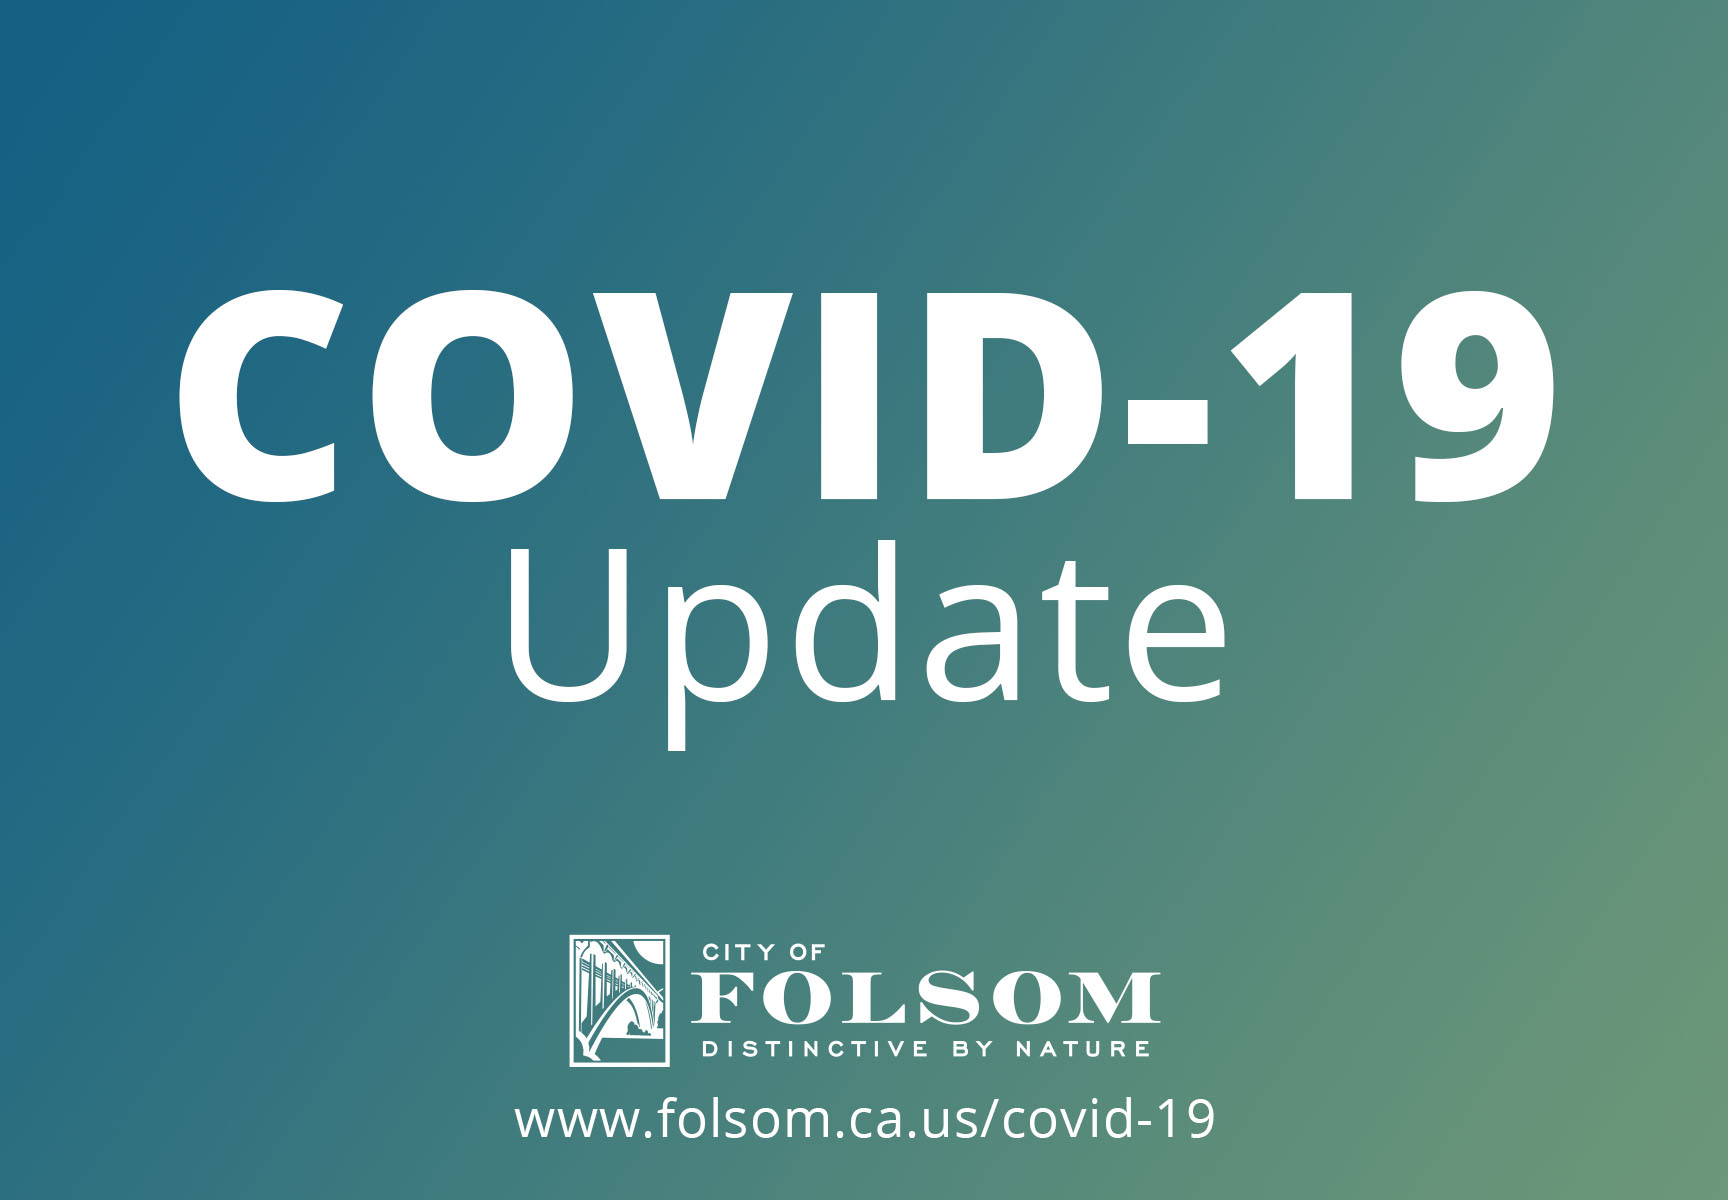 COVID-19 update graphic in white text on a blue to green gradient with an all white city of folsom logo and the covid-19 URL site below the logo